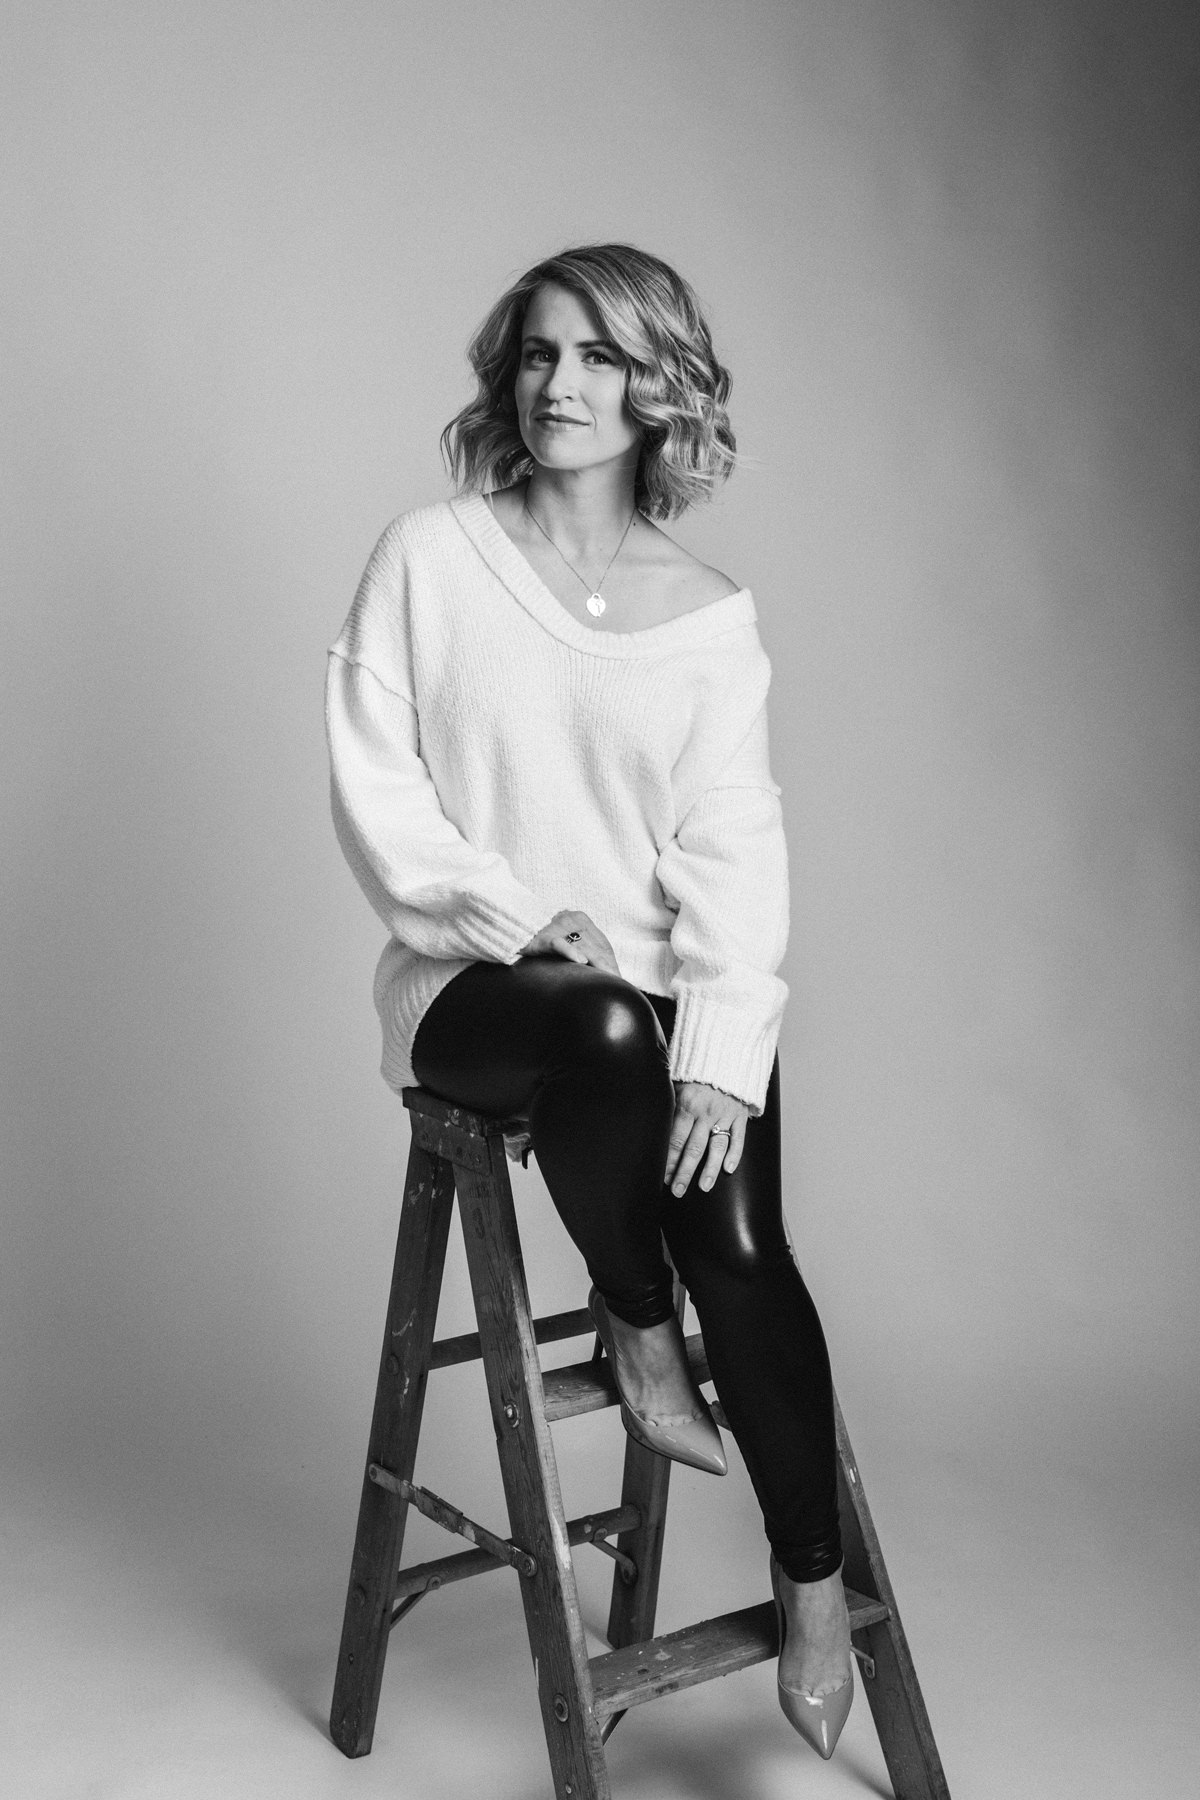 A black and White portrait of a women sitting on a wooden stepladder. This was photographed in a studio. The women is wearing a long white sweater and black leggings with high heel shoes.